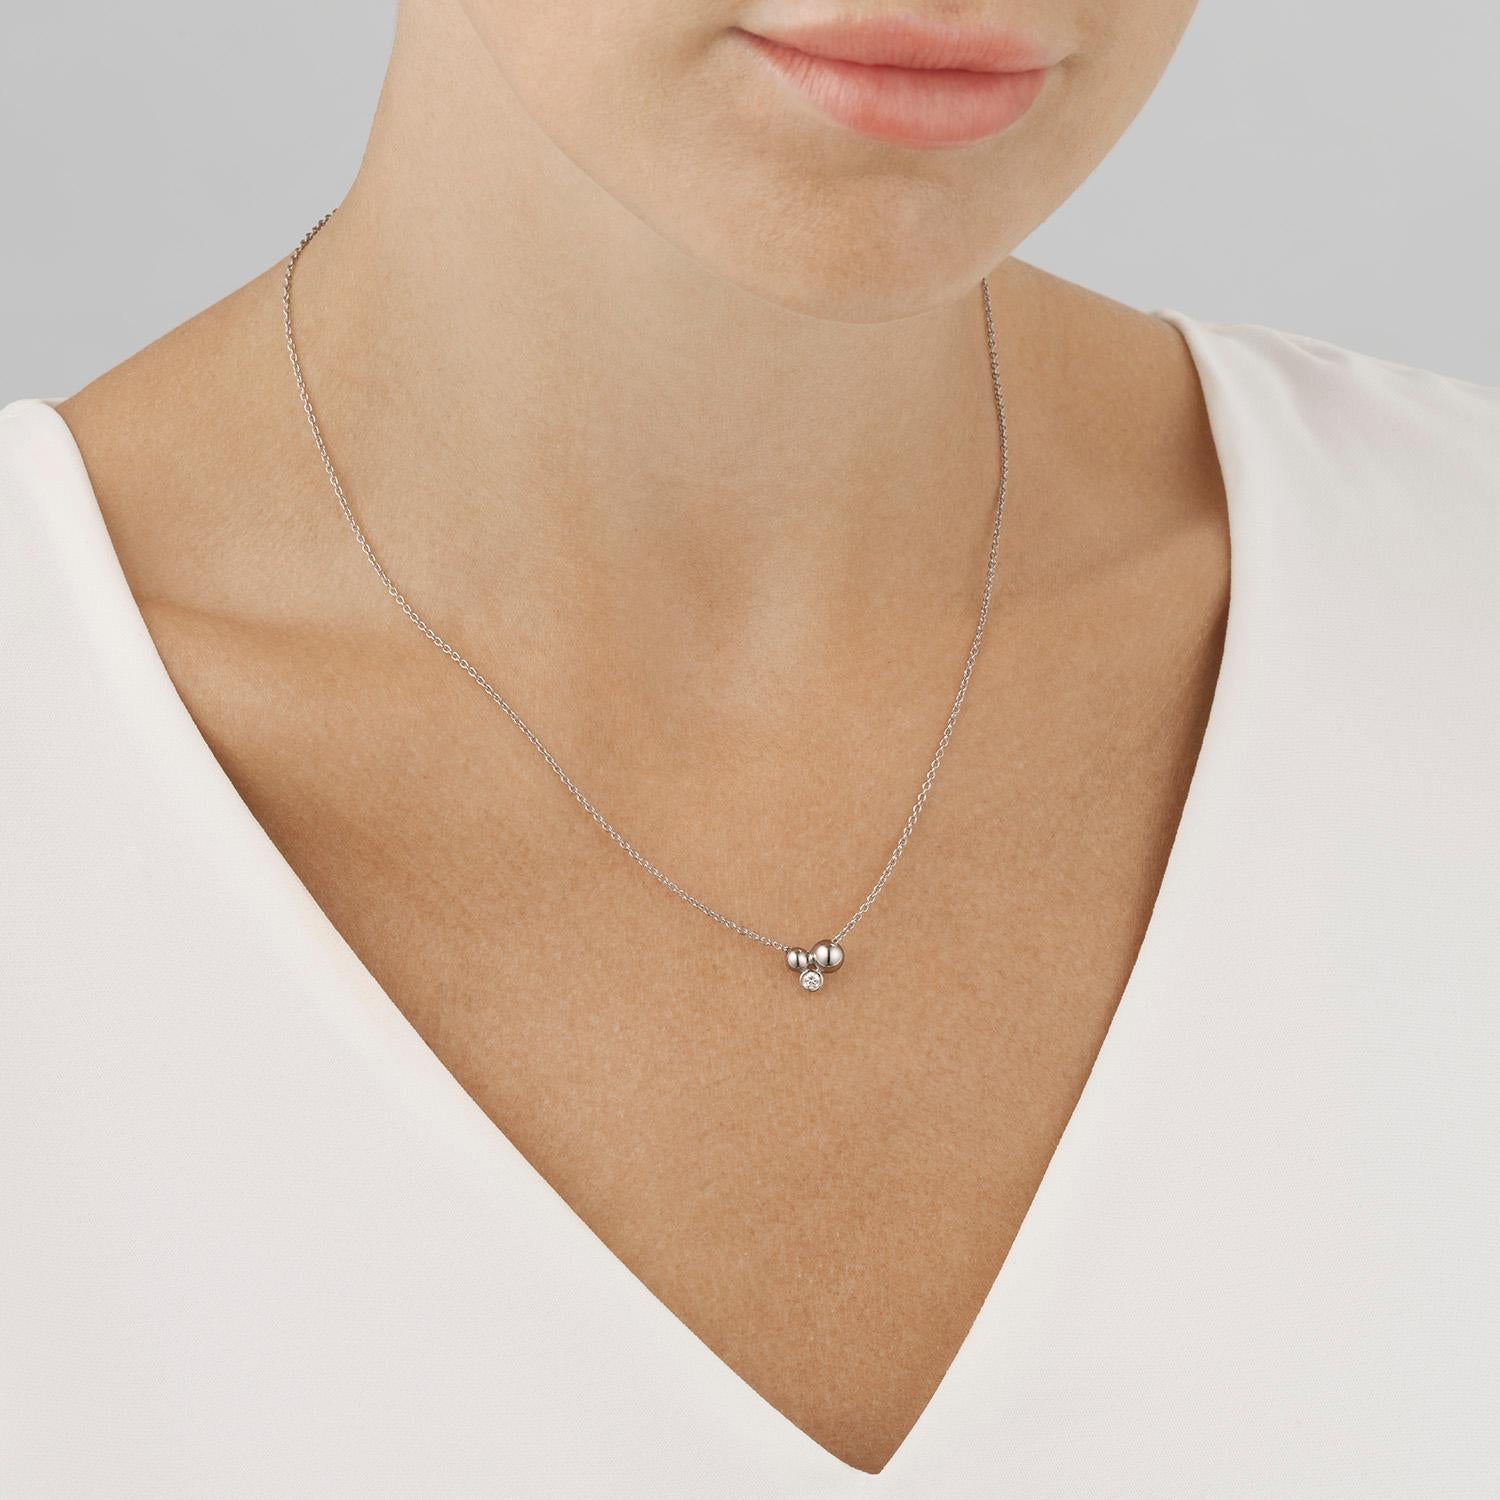 Understated and elegant, this beautiful pendant is formed from two sterling silver beads clustered together with a single brilliant cut diamond and suspended from a fine chain. Contemporary in design, the pendant has a classical sophistication that